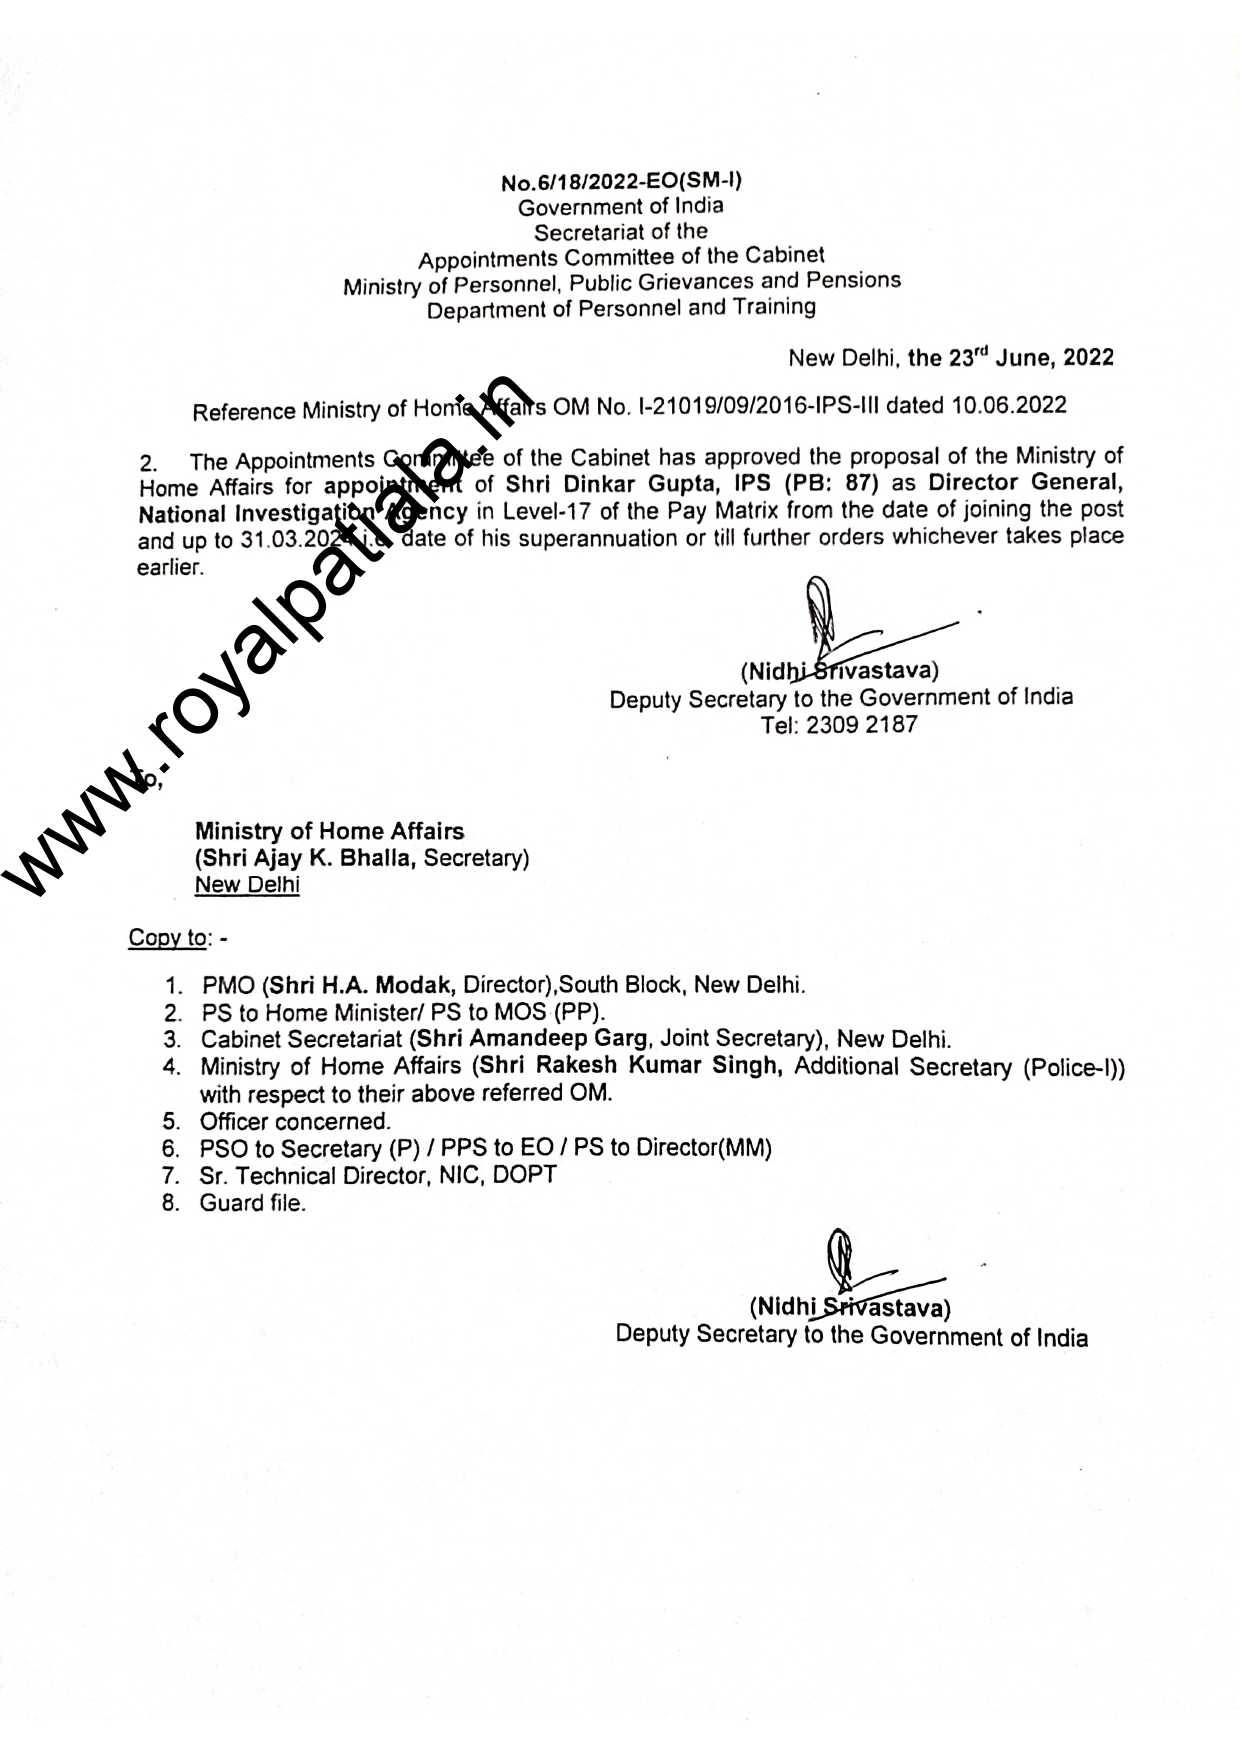 Punjab DGP becomes head of National Investigation Agency